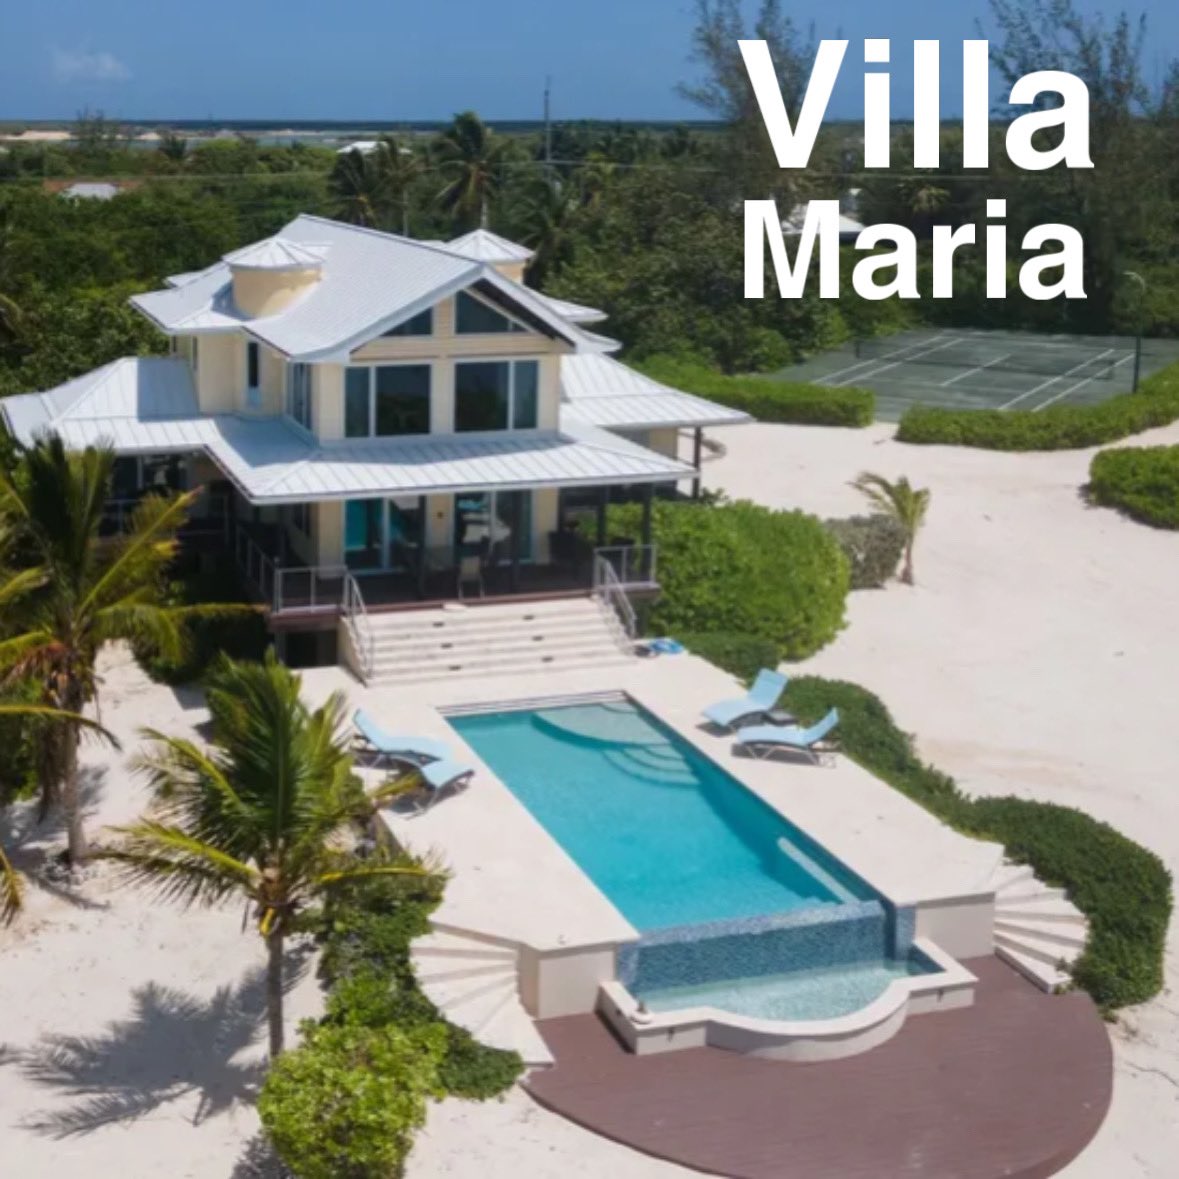 Villa Maria

One of the most sought-after locations in Cayman

A primary three-bedroom residence, charming guest cottage, tennis court, swimming pool & dock

Member of CIREBA
MLS # 415430

#BeachfrontEstate #Scuba 
#CaymanRealEstate #caymansothebysrealty #caymanislandsrealestate